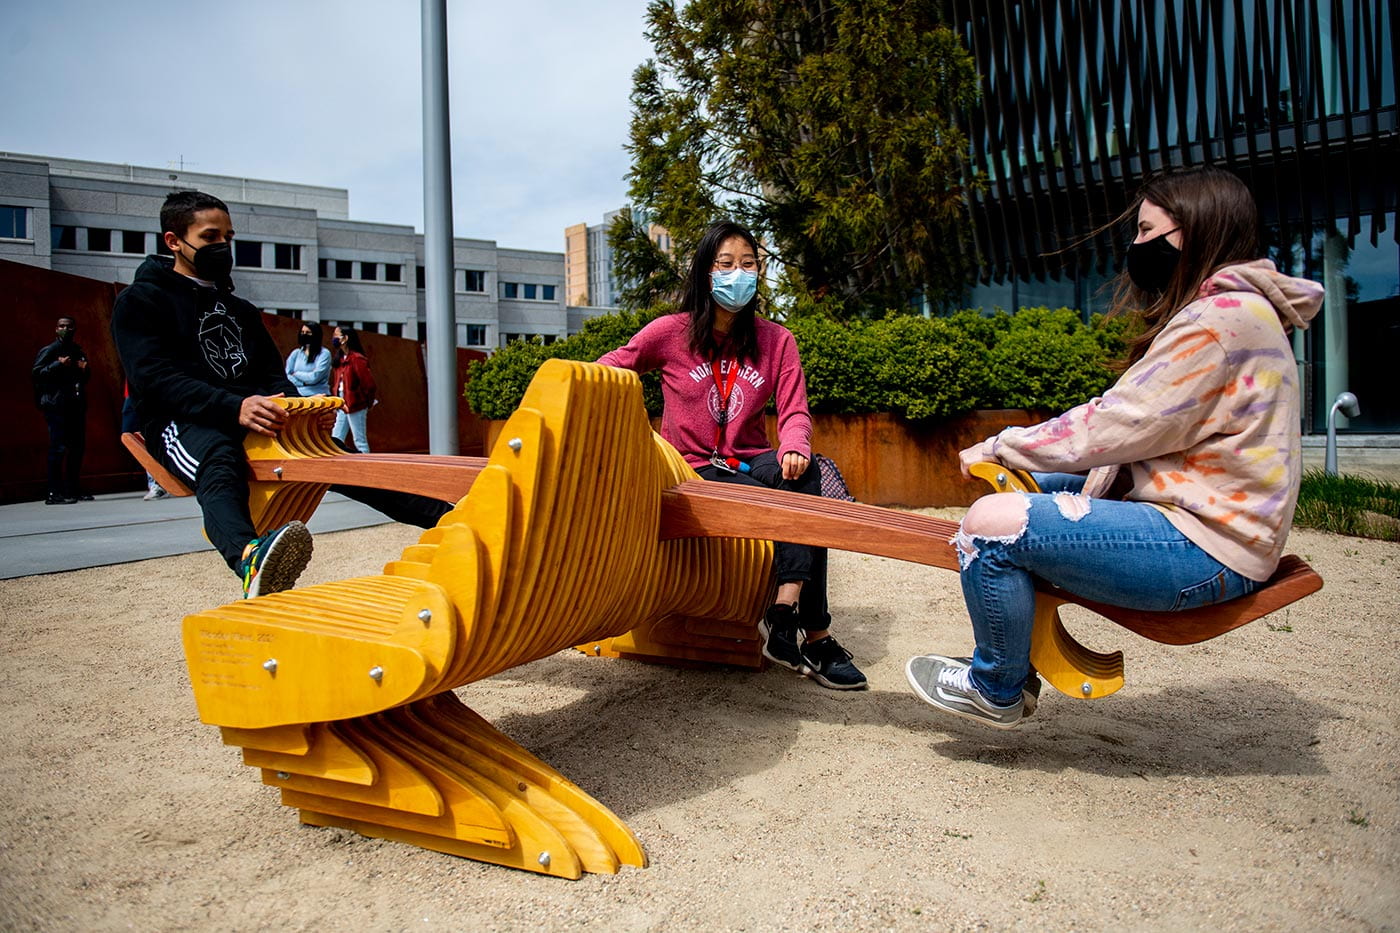 Students Architects Lead the Way on New Campus Furniture